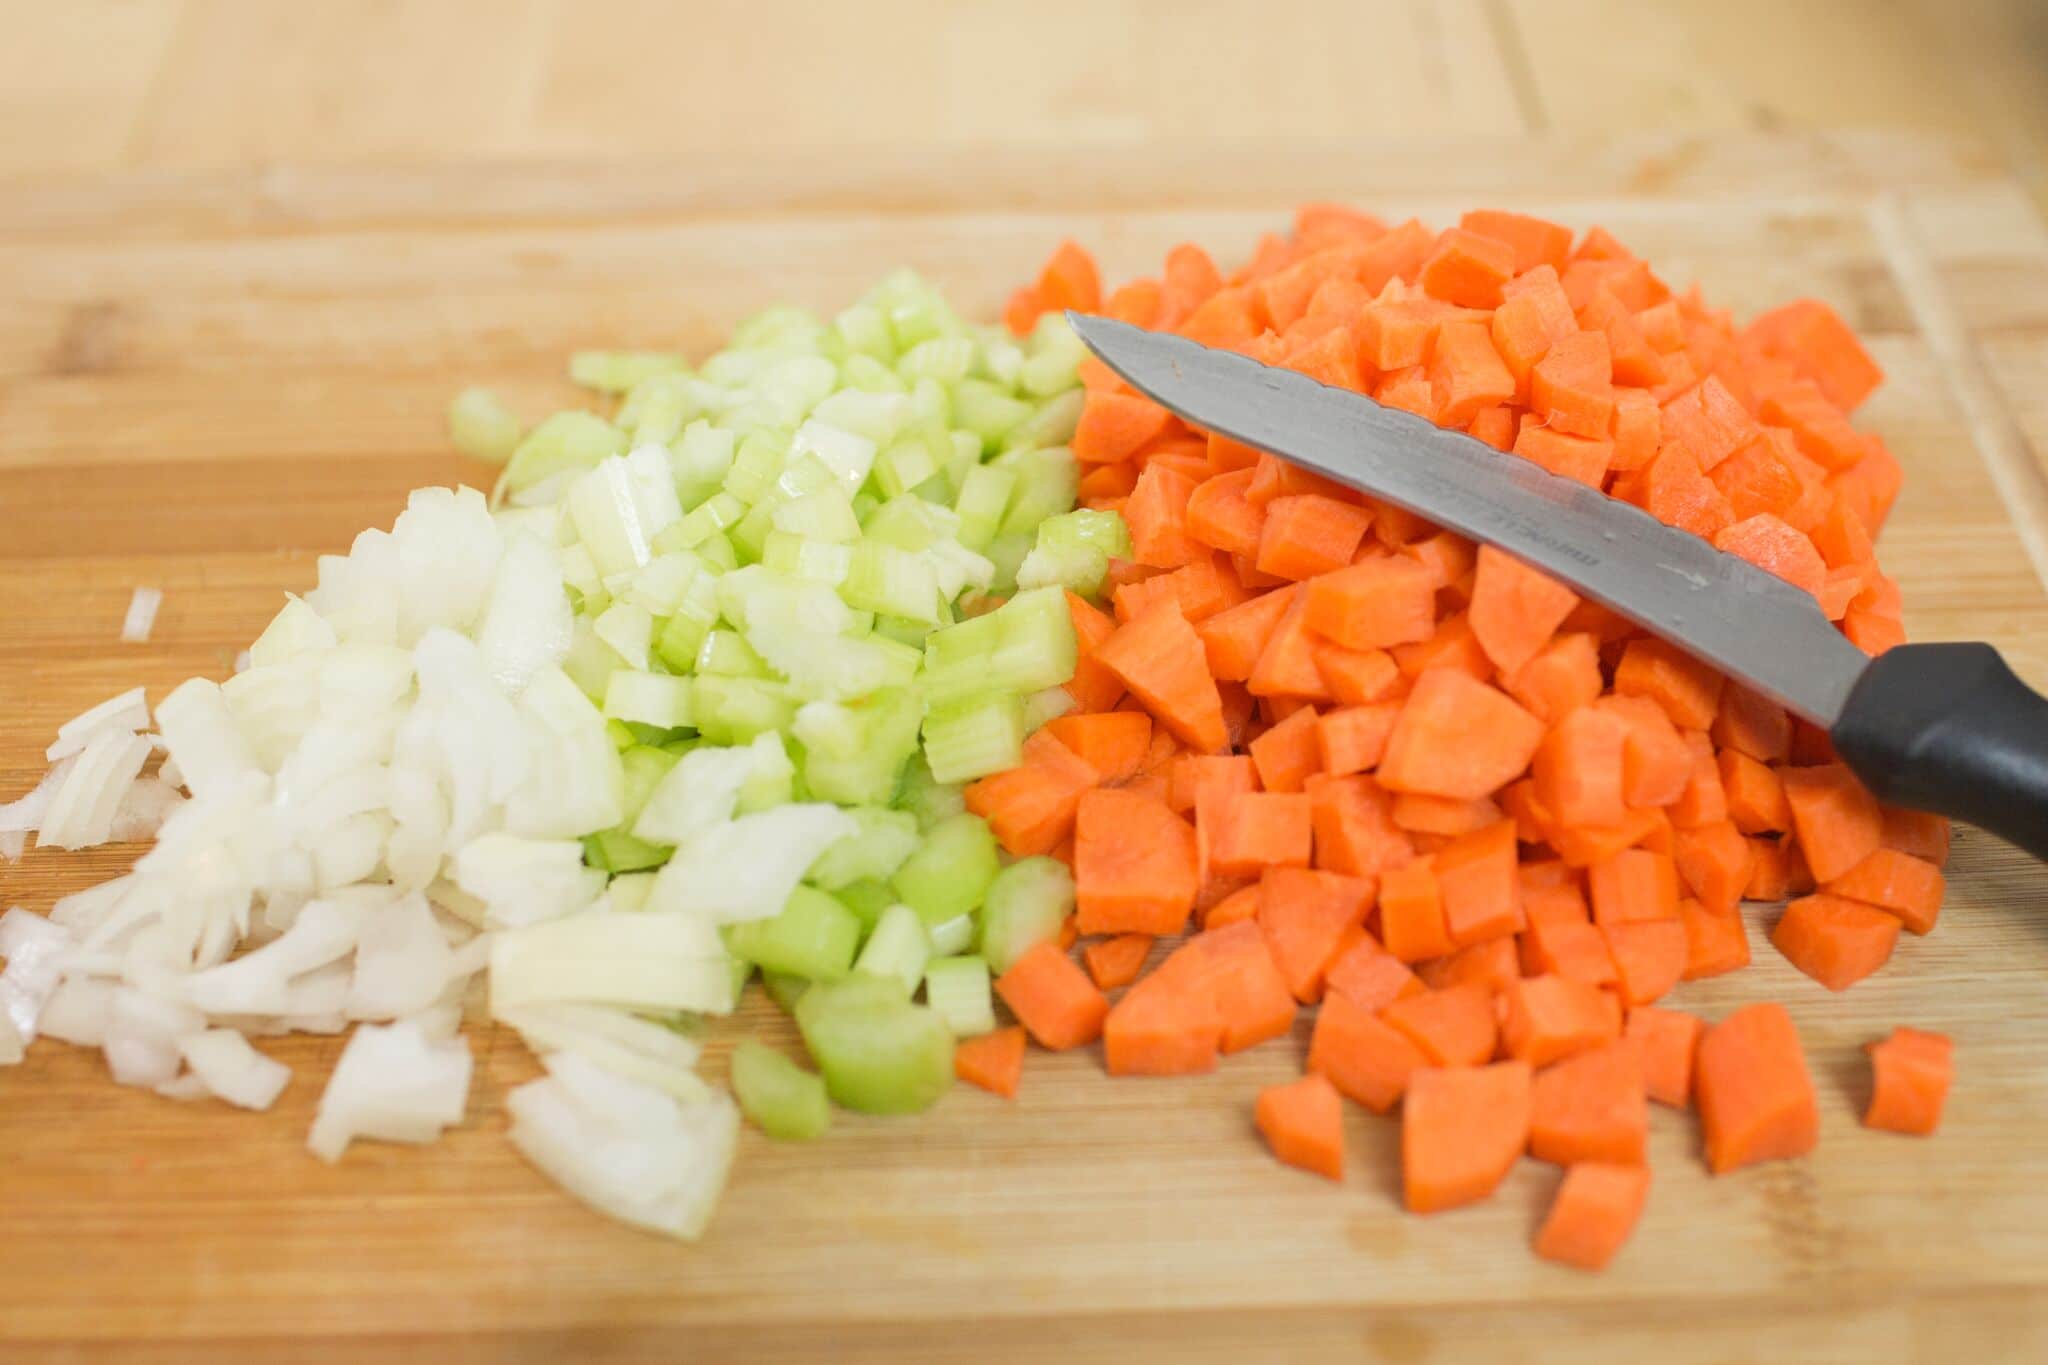 Chop your onions, carrots and celery then set aside.